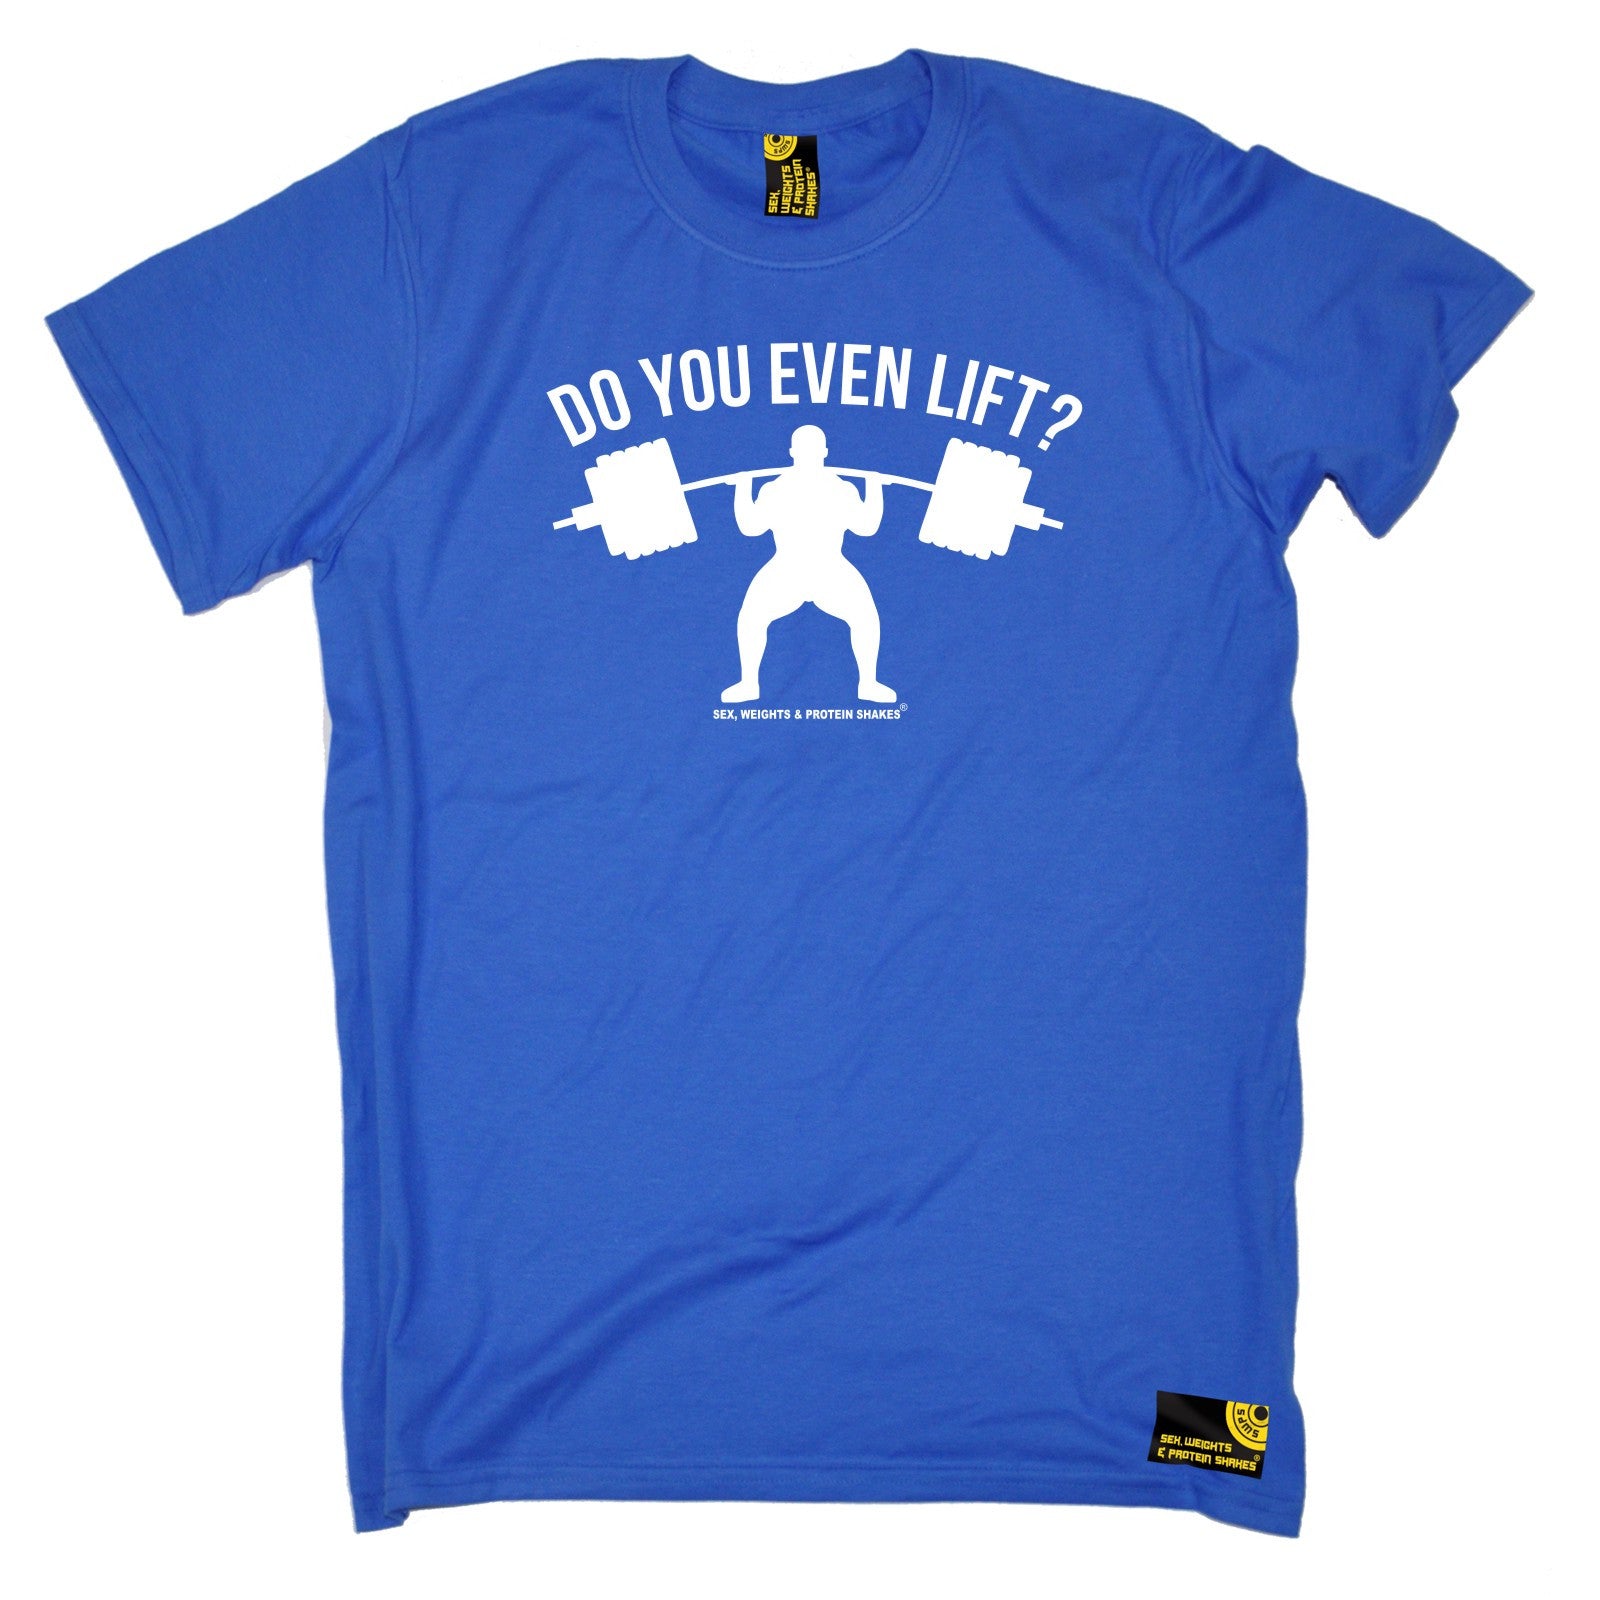 Do You Even Lift MENS SWPS T-SHIRT birthday gift workout gym training fitness eBay photo